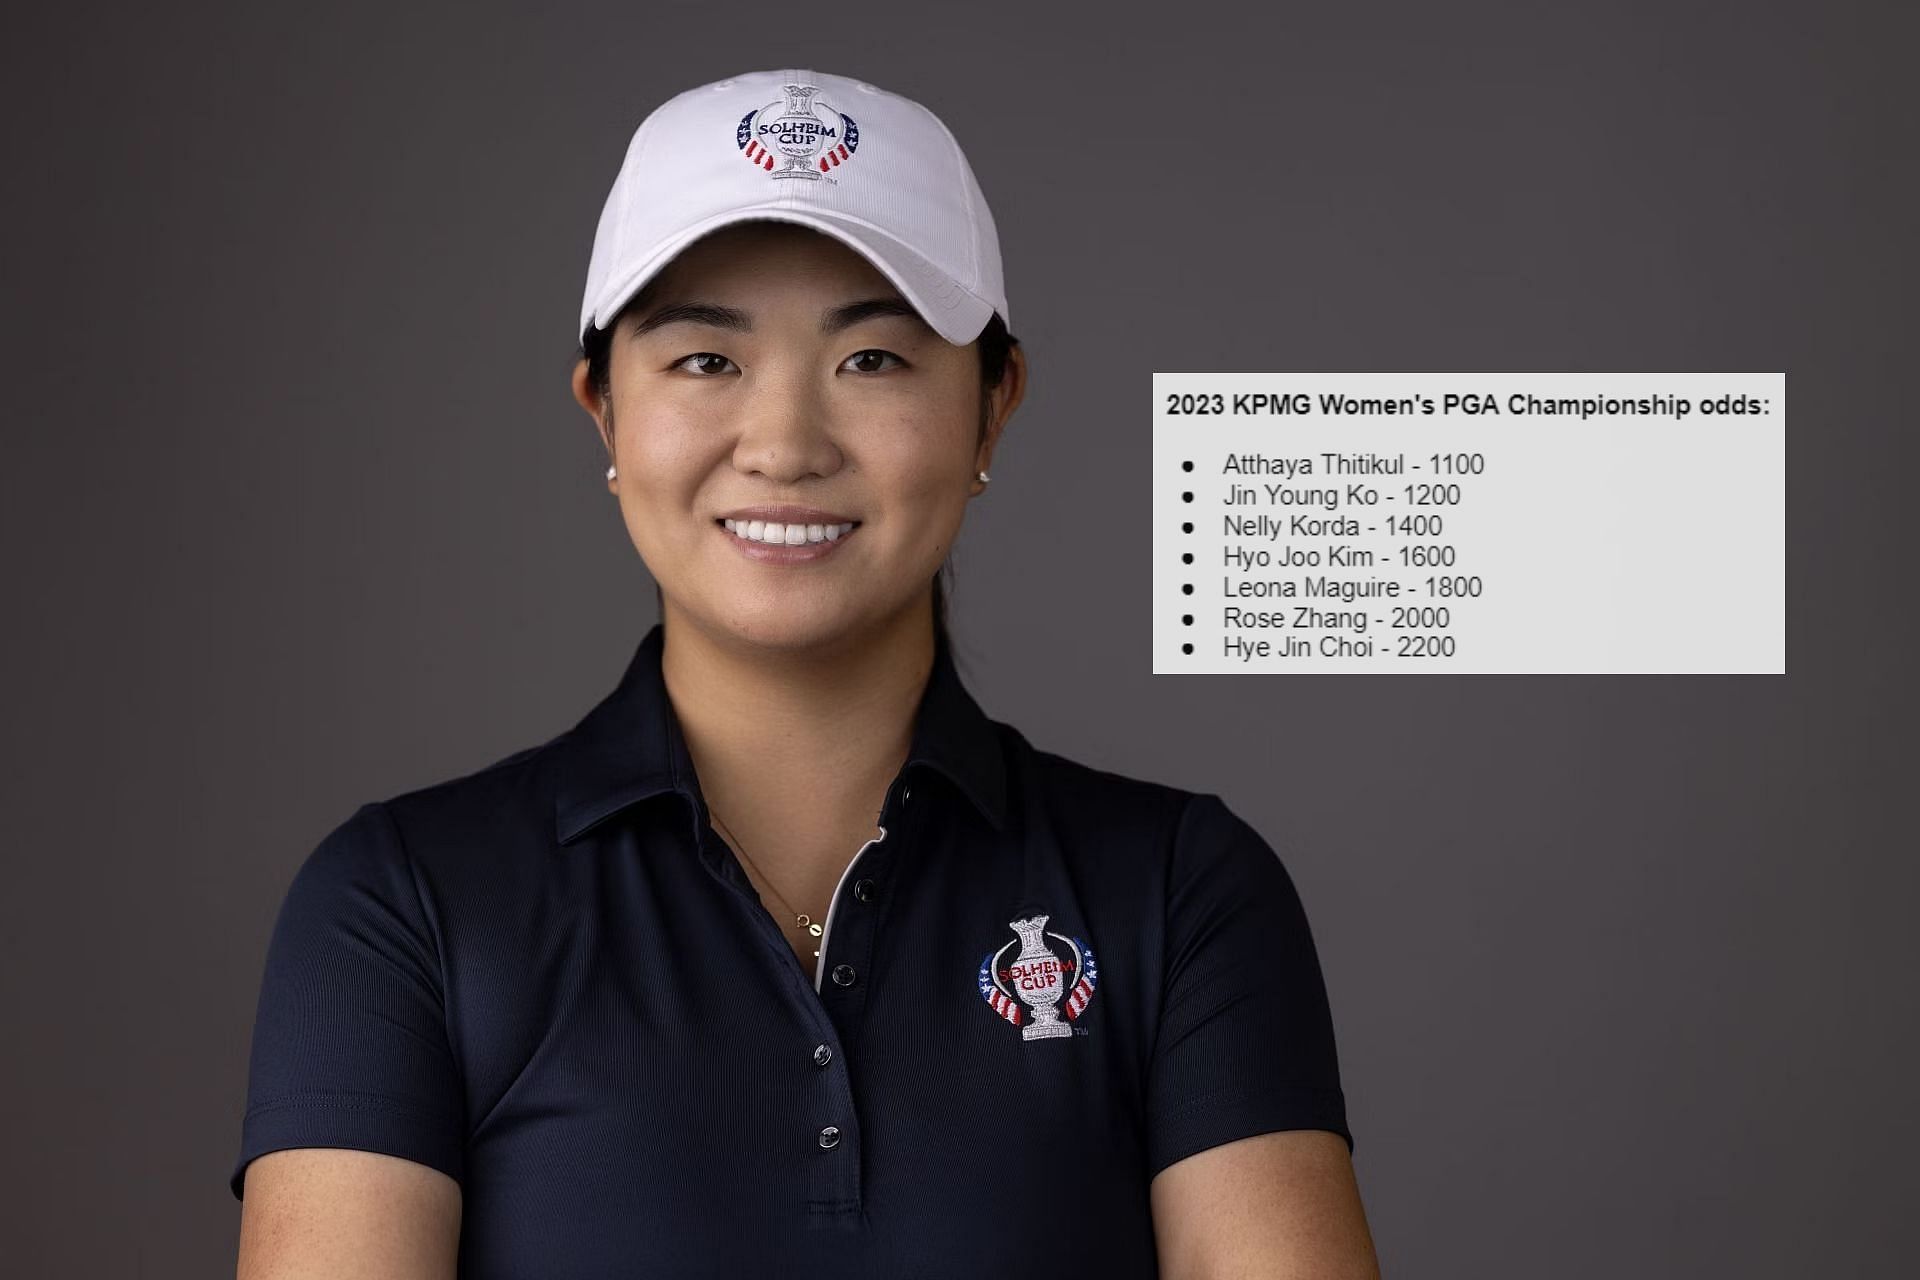 Rose Zhang at 2023 Solheim Cup Portraits